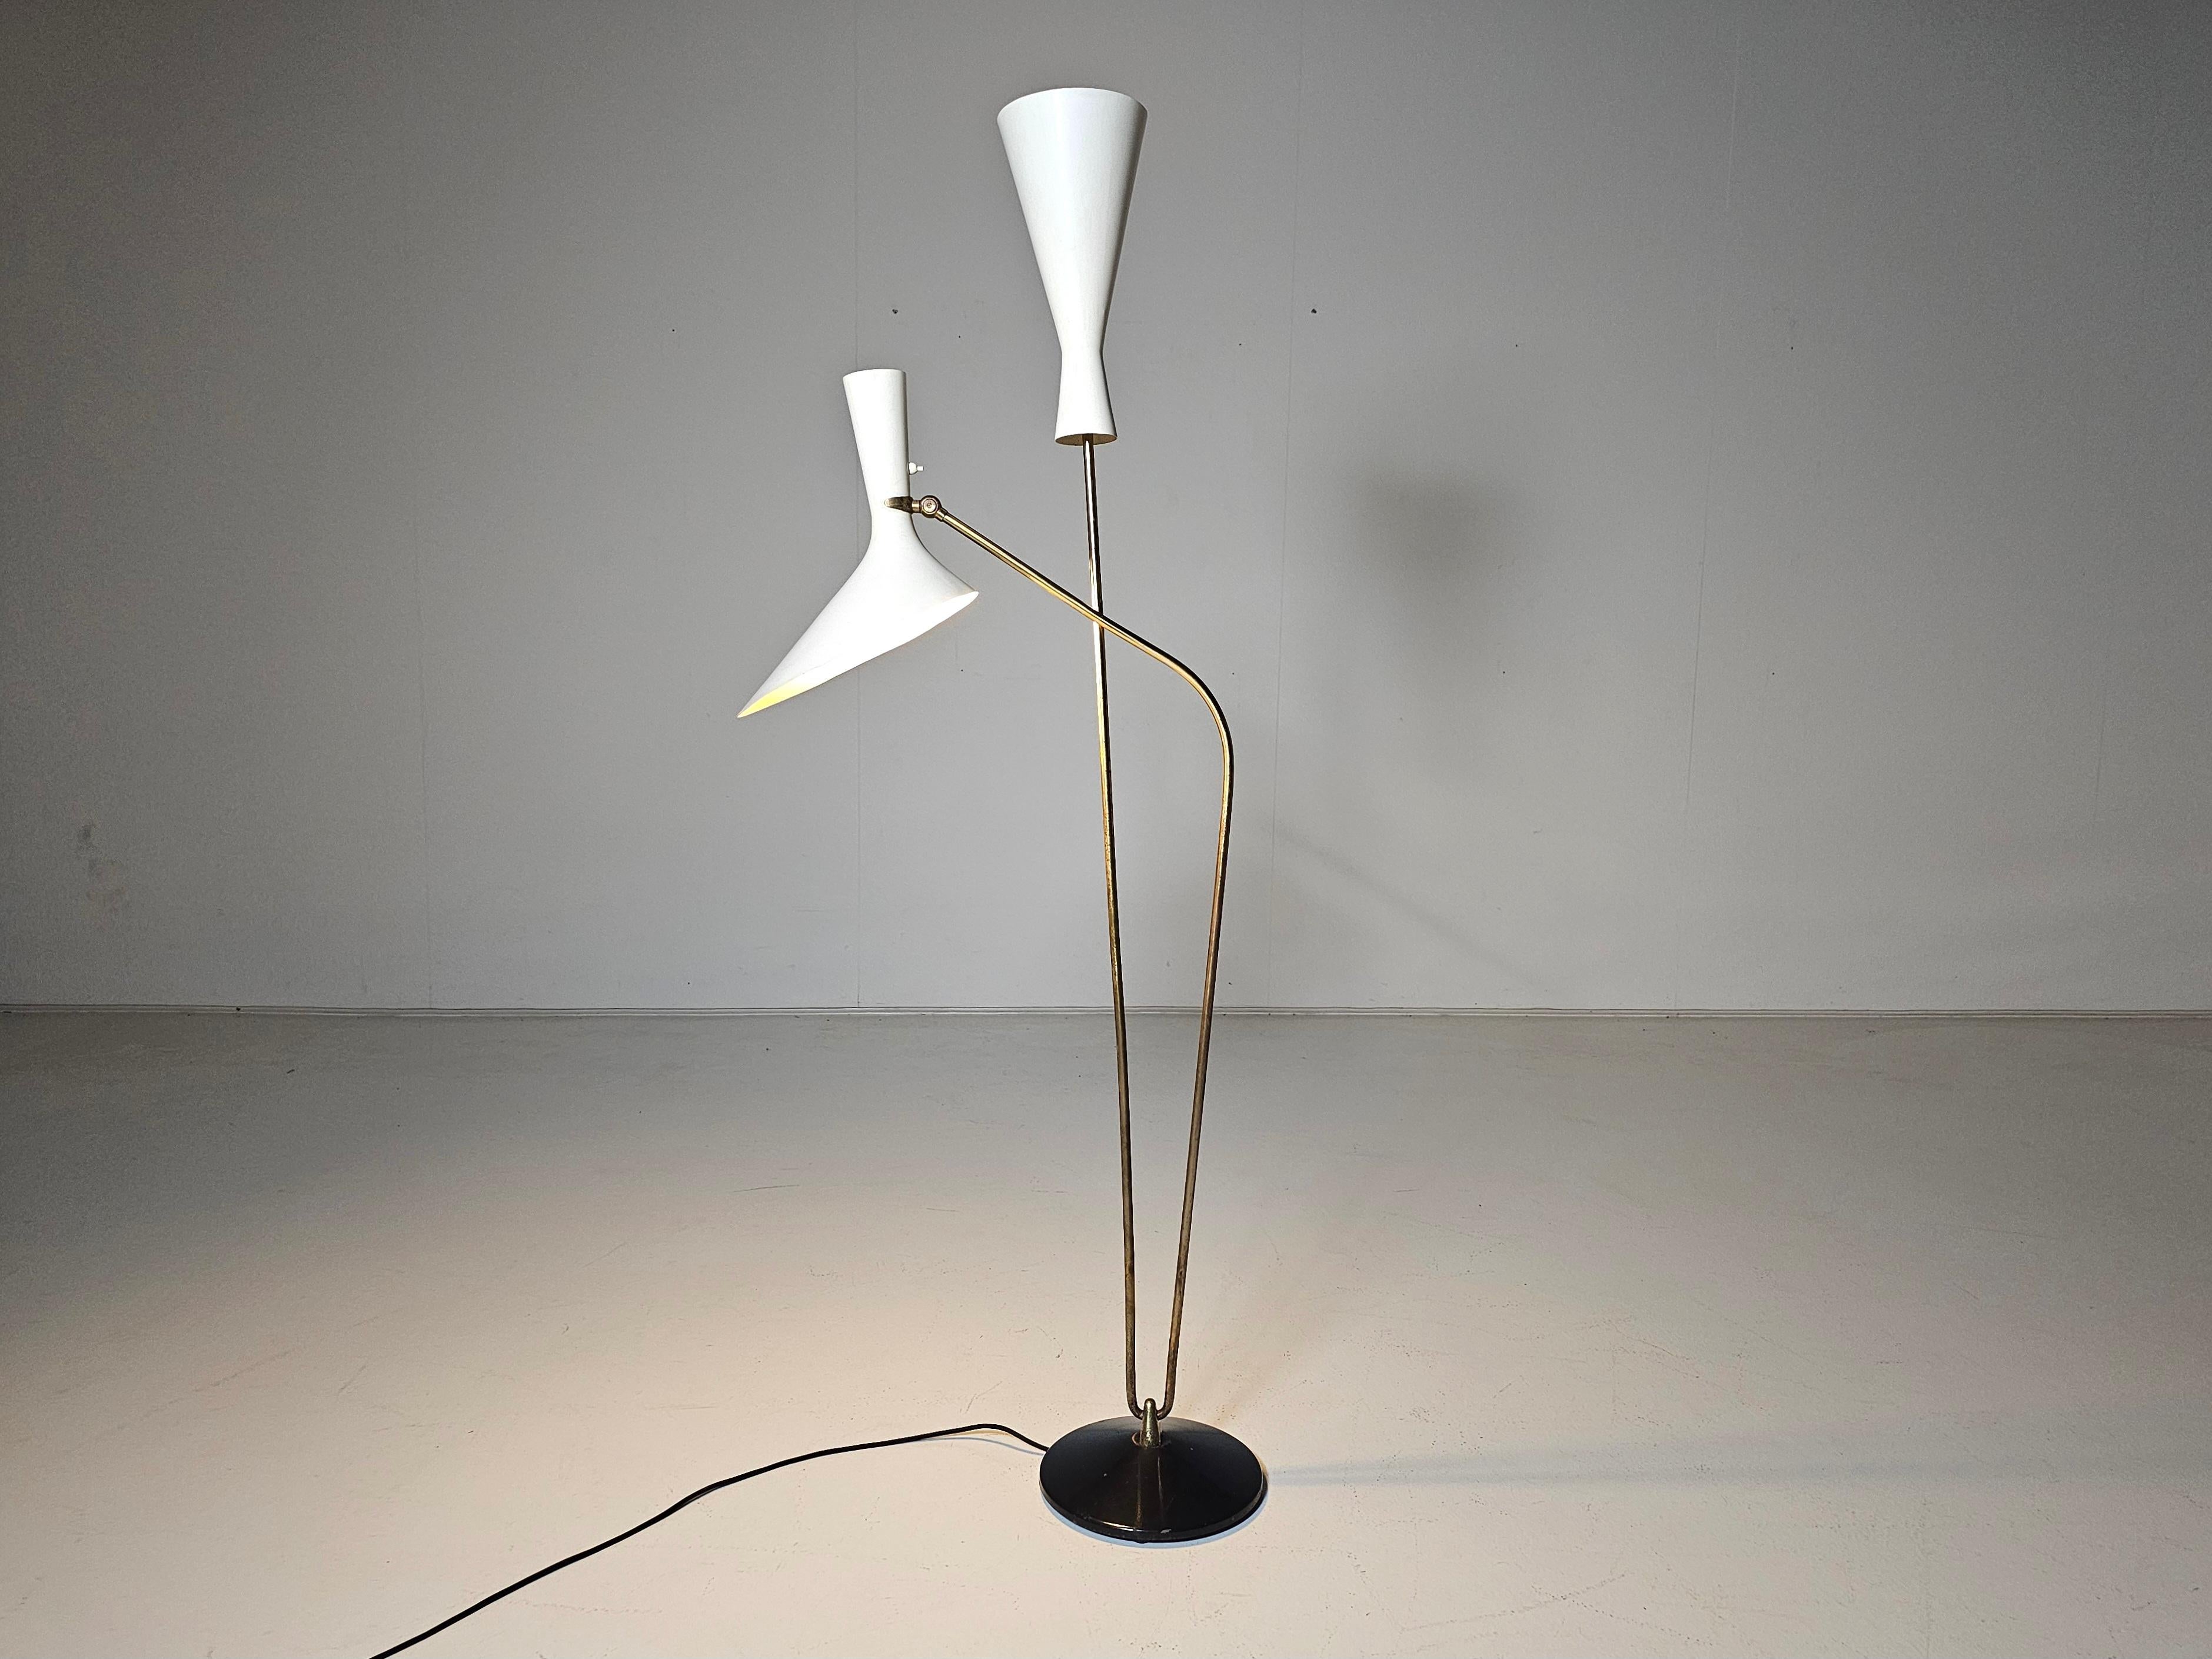 Beautiful very rare and ORIGINAL floor lamp designed by Professor Carl Moor and manufactured by BAG Turgi.  The lamp was produced in different versions. This is the luxurious version with a solid base and brass rods.

It stands as a beacon of